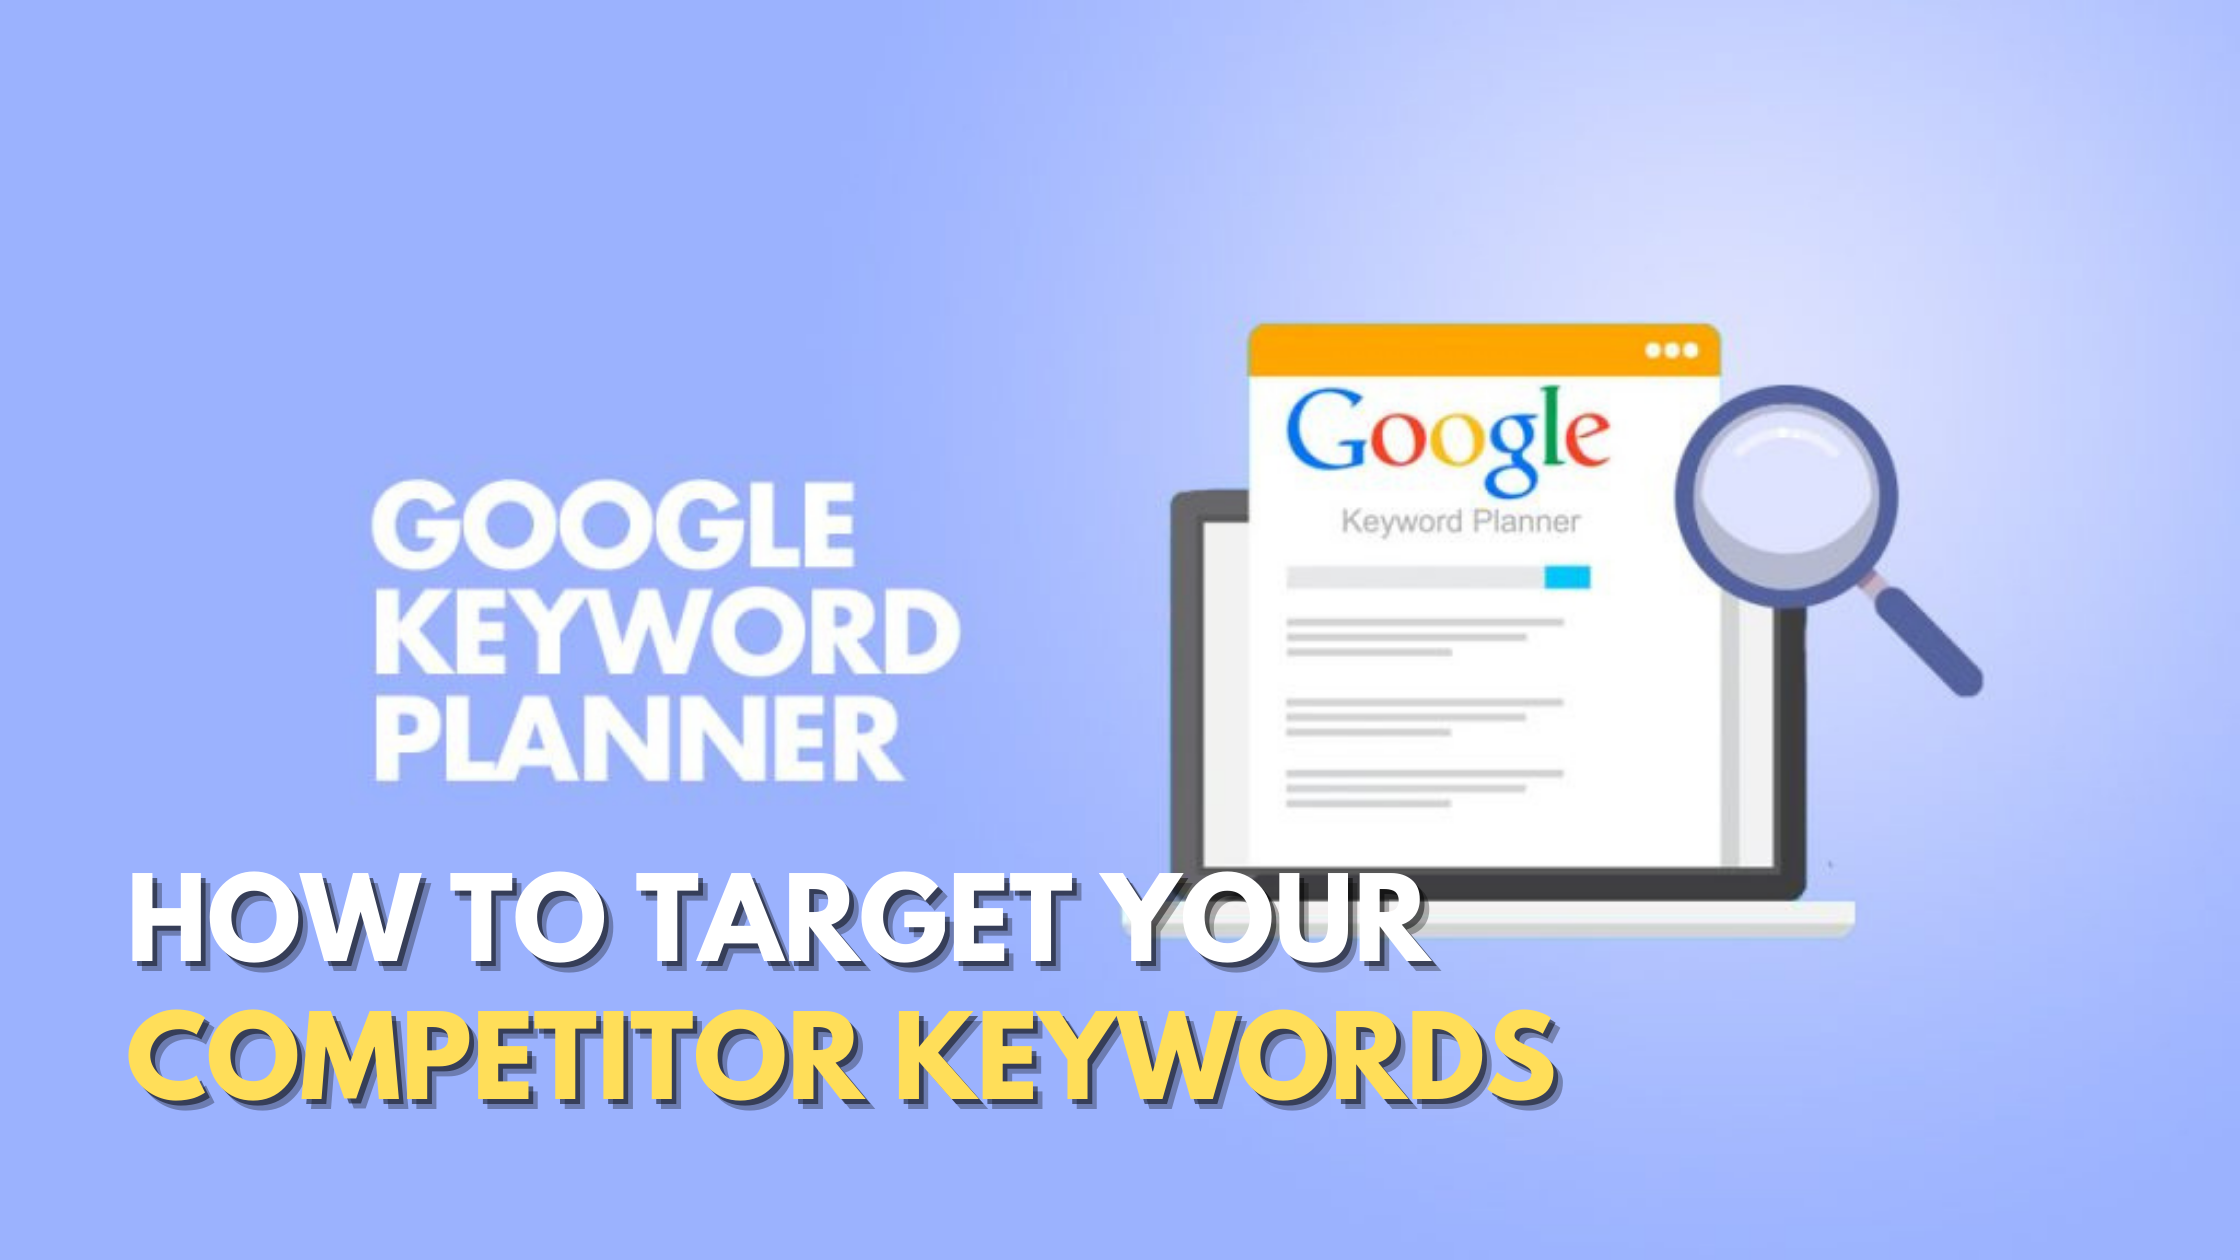 Target Your Competitor Keywords